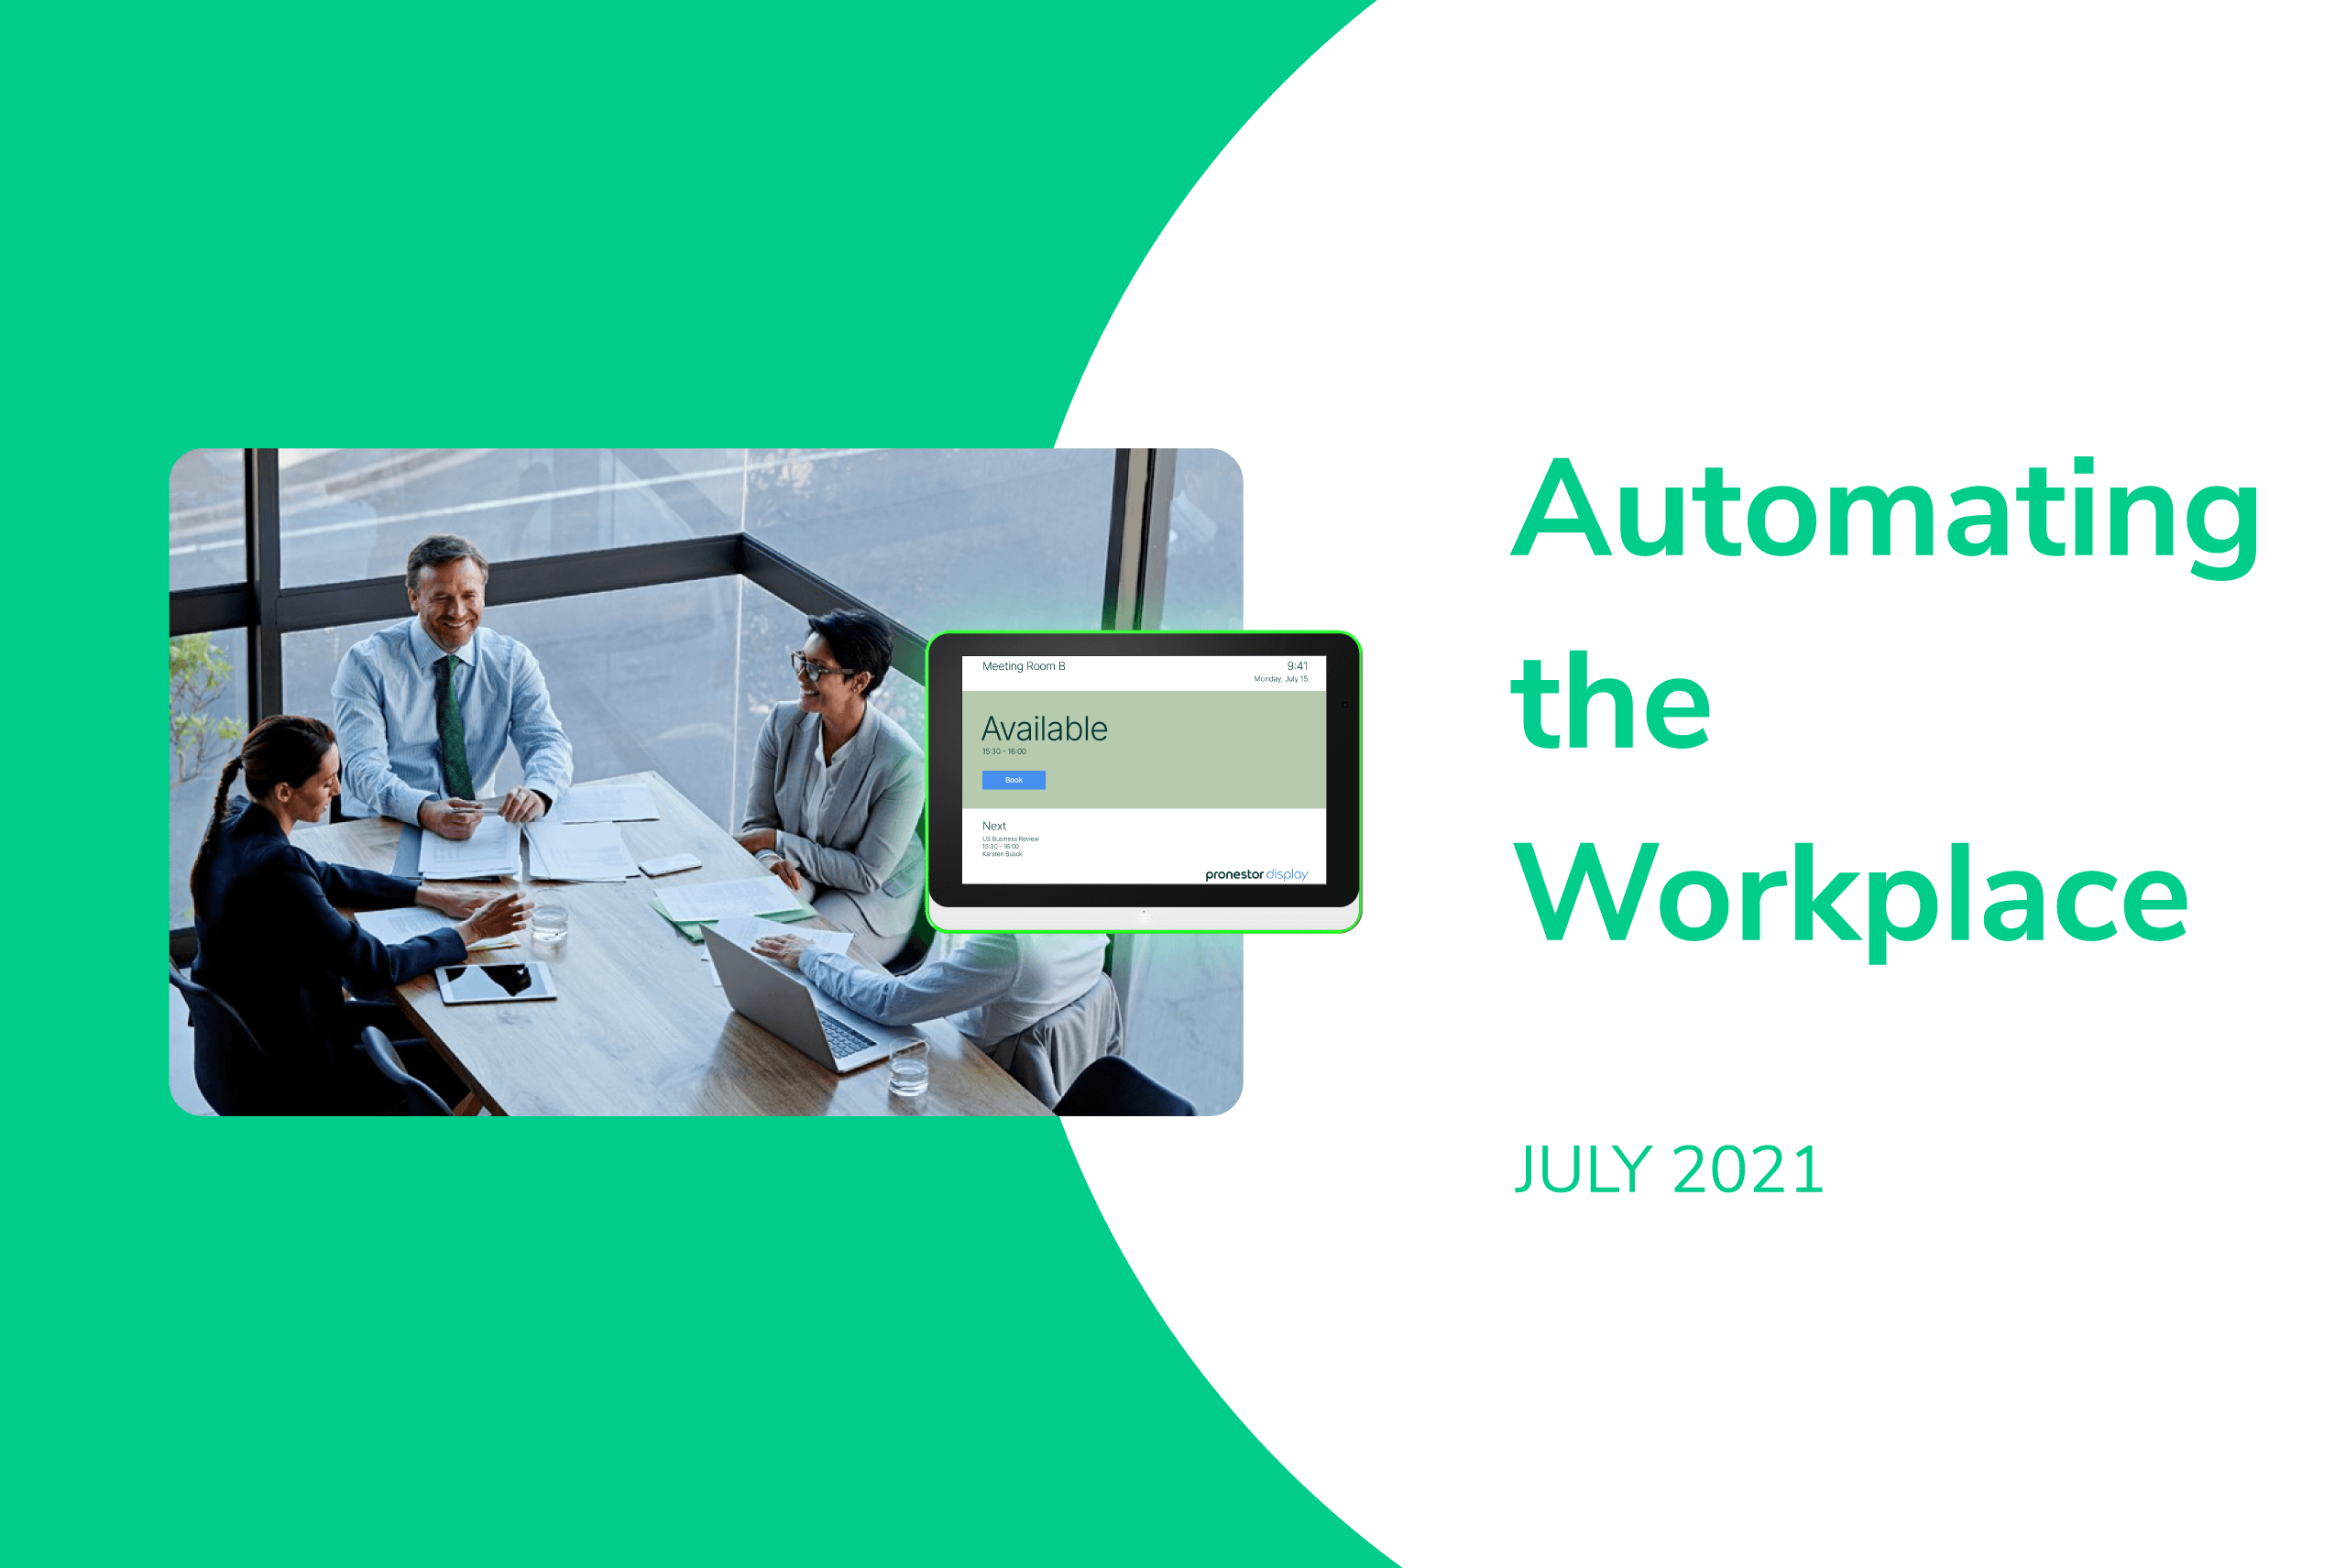 Automating the Workplace